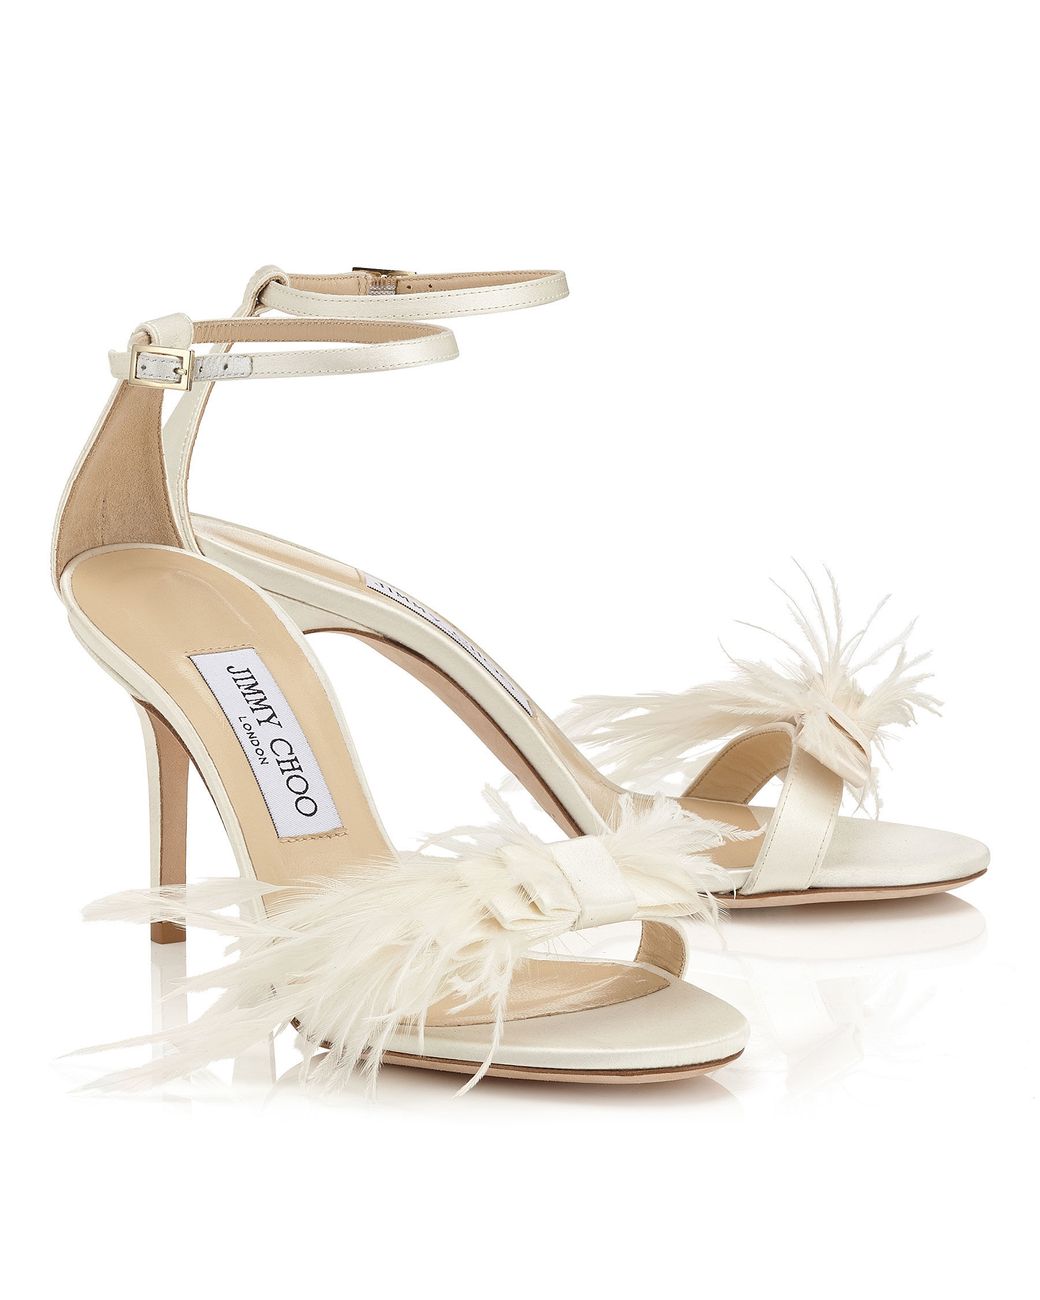 Jimmy Choo Vivien 85 Ivory Satin Sandals With Feather Bow in White | Lyst